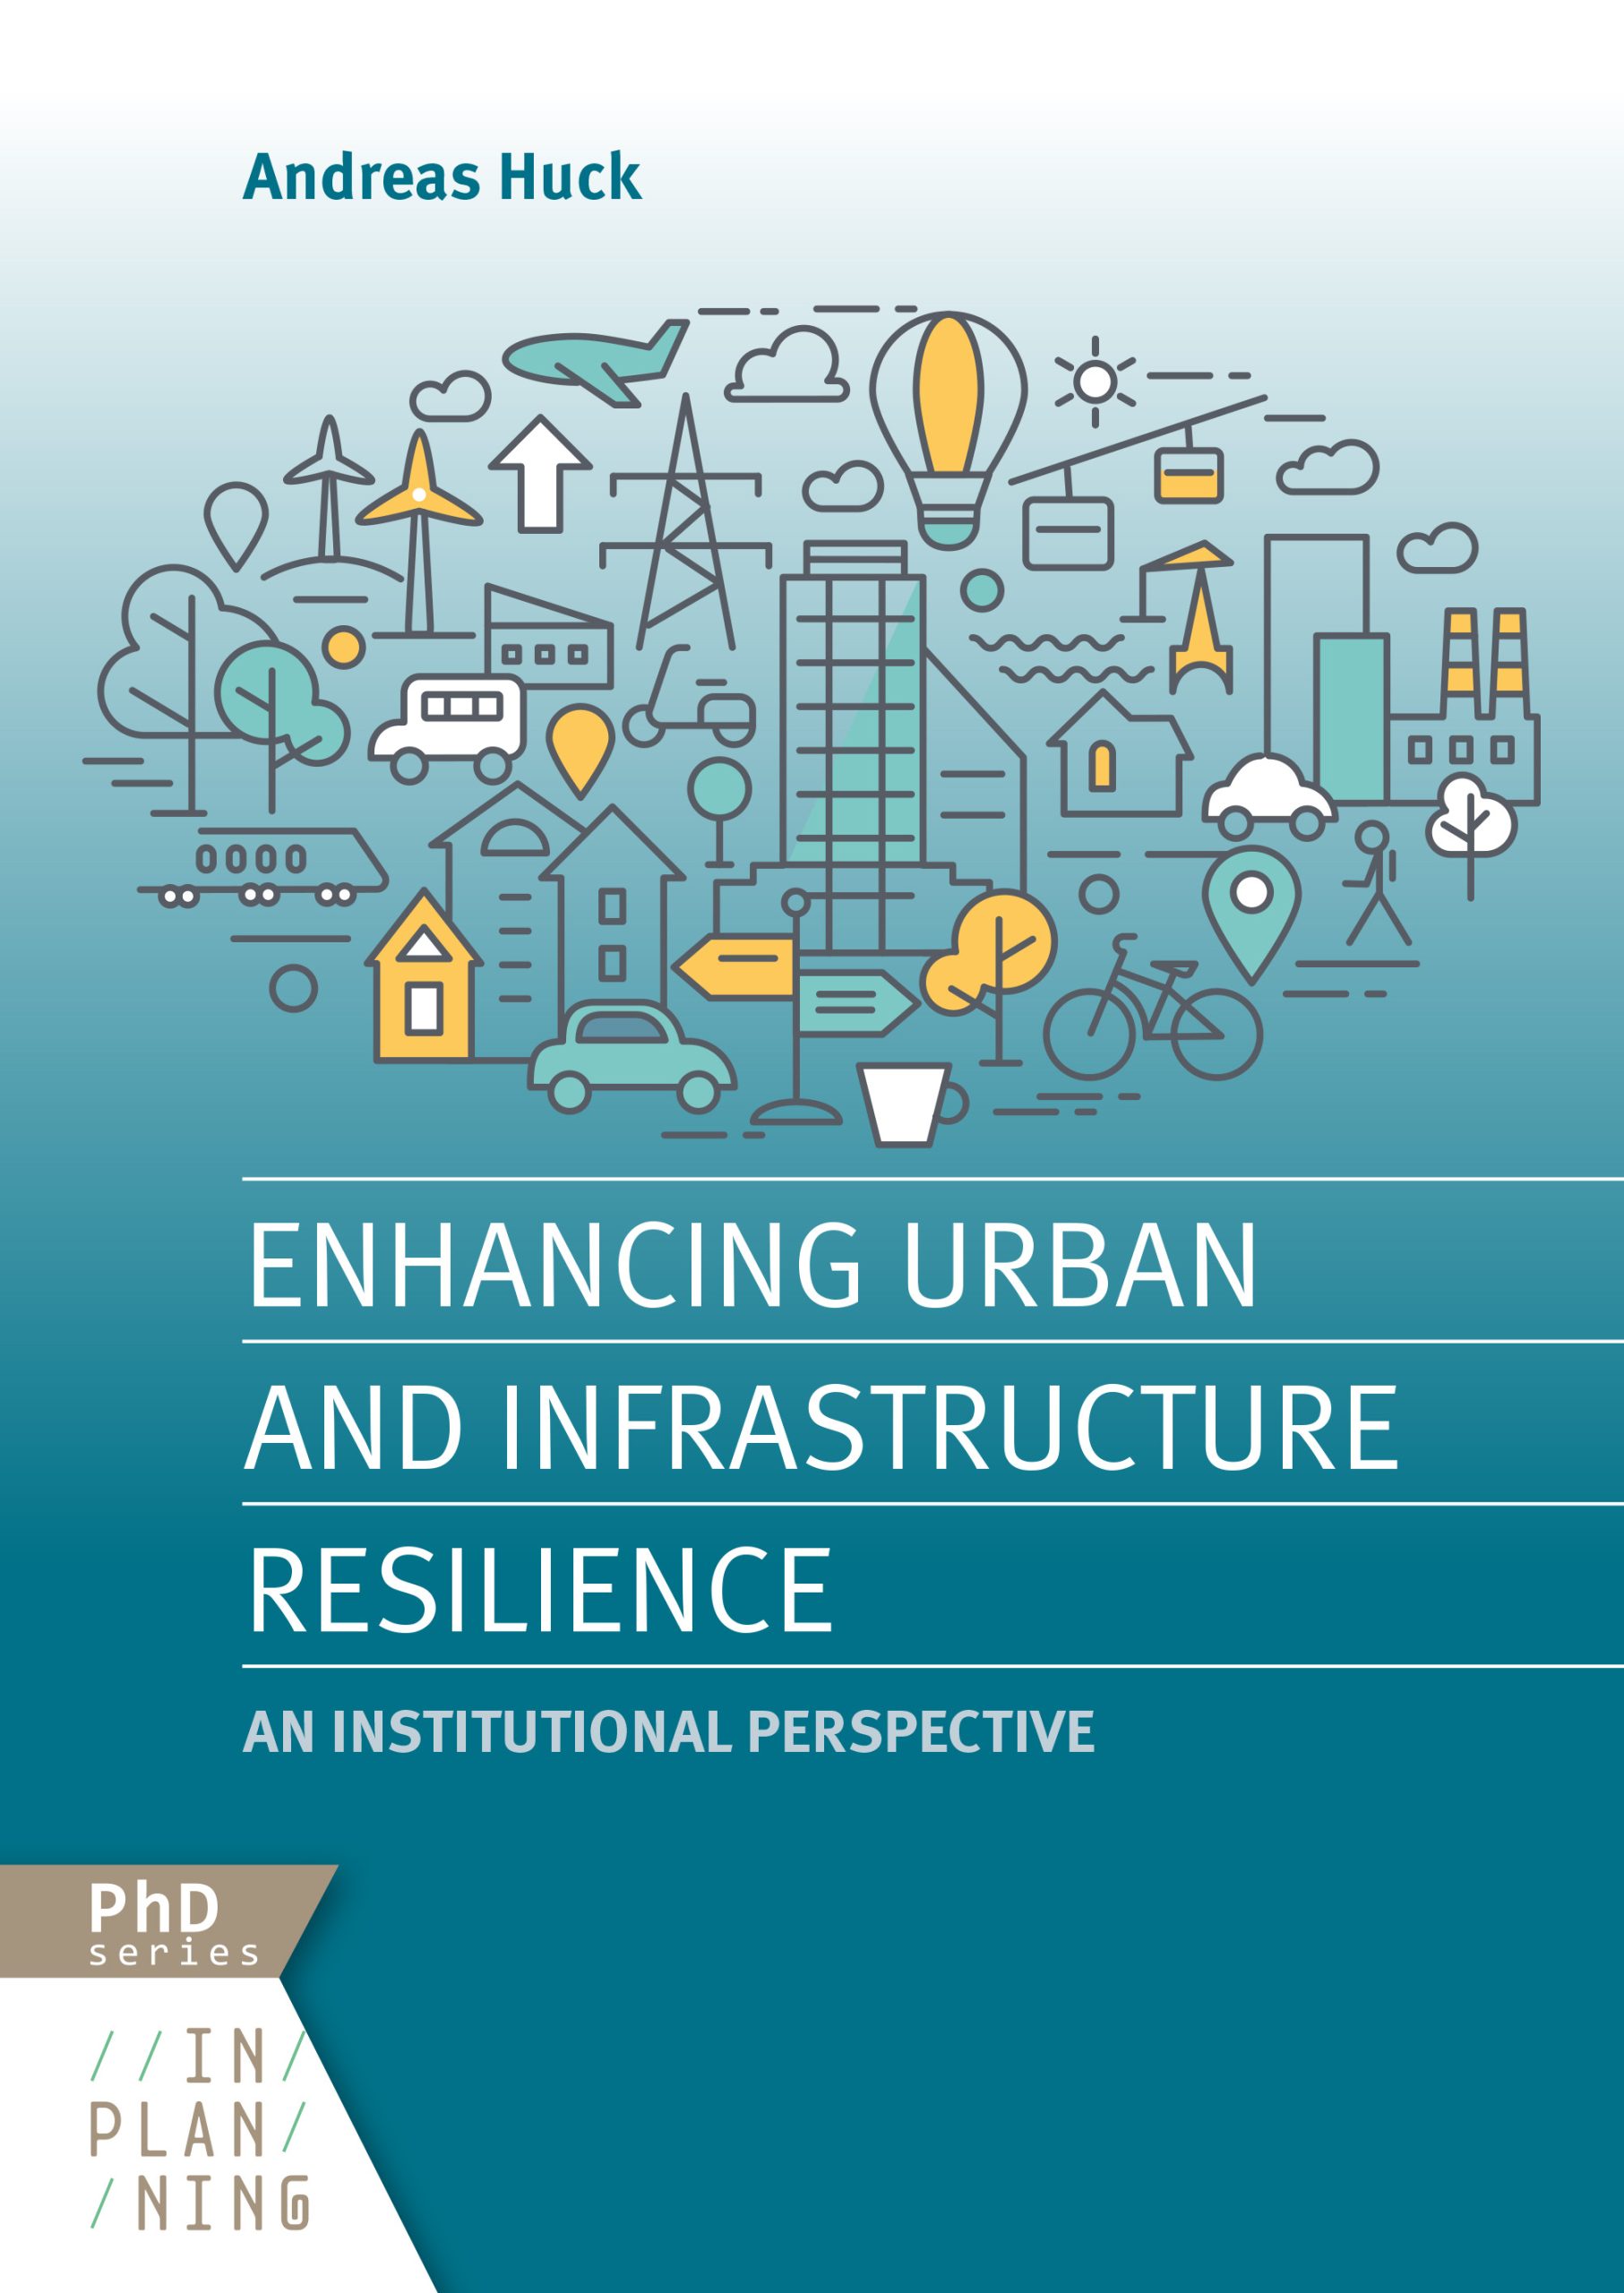 PhD ANDREAS HUCK enhancing urban and infrastructure resilience